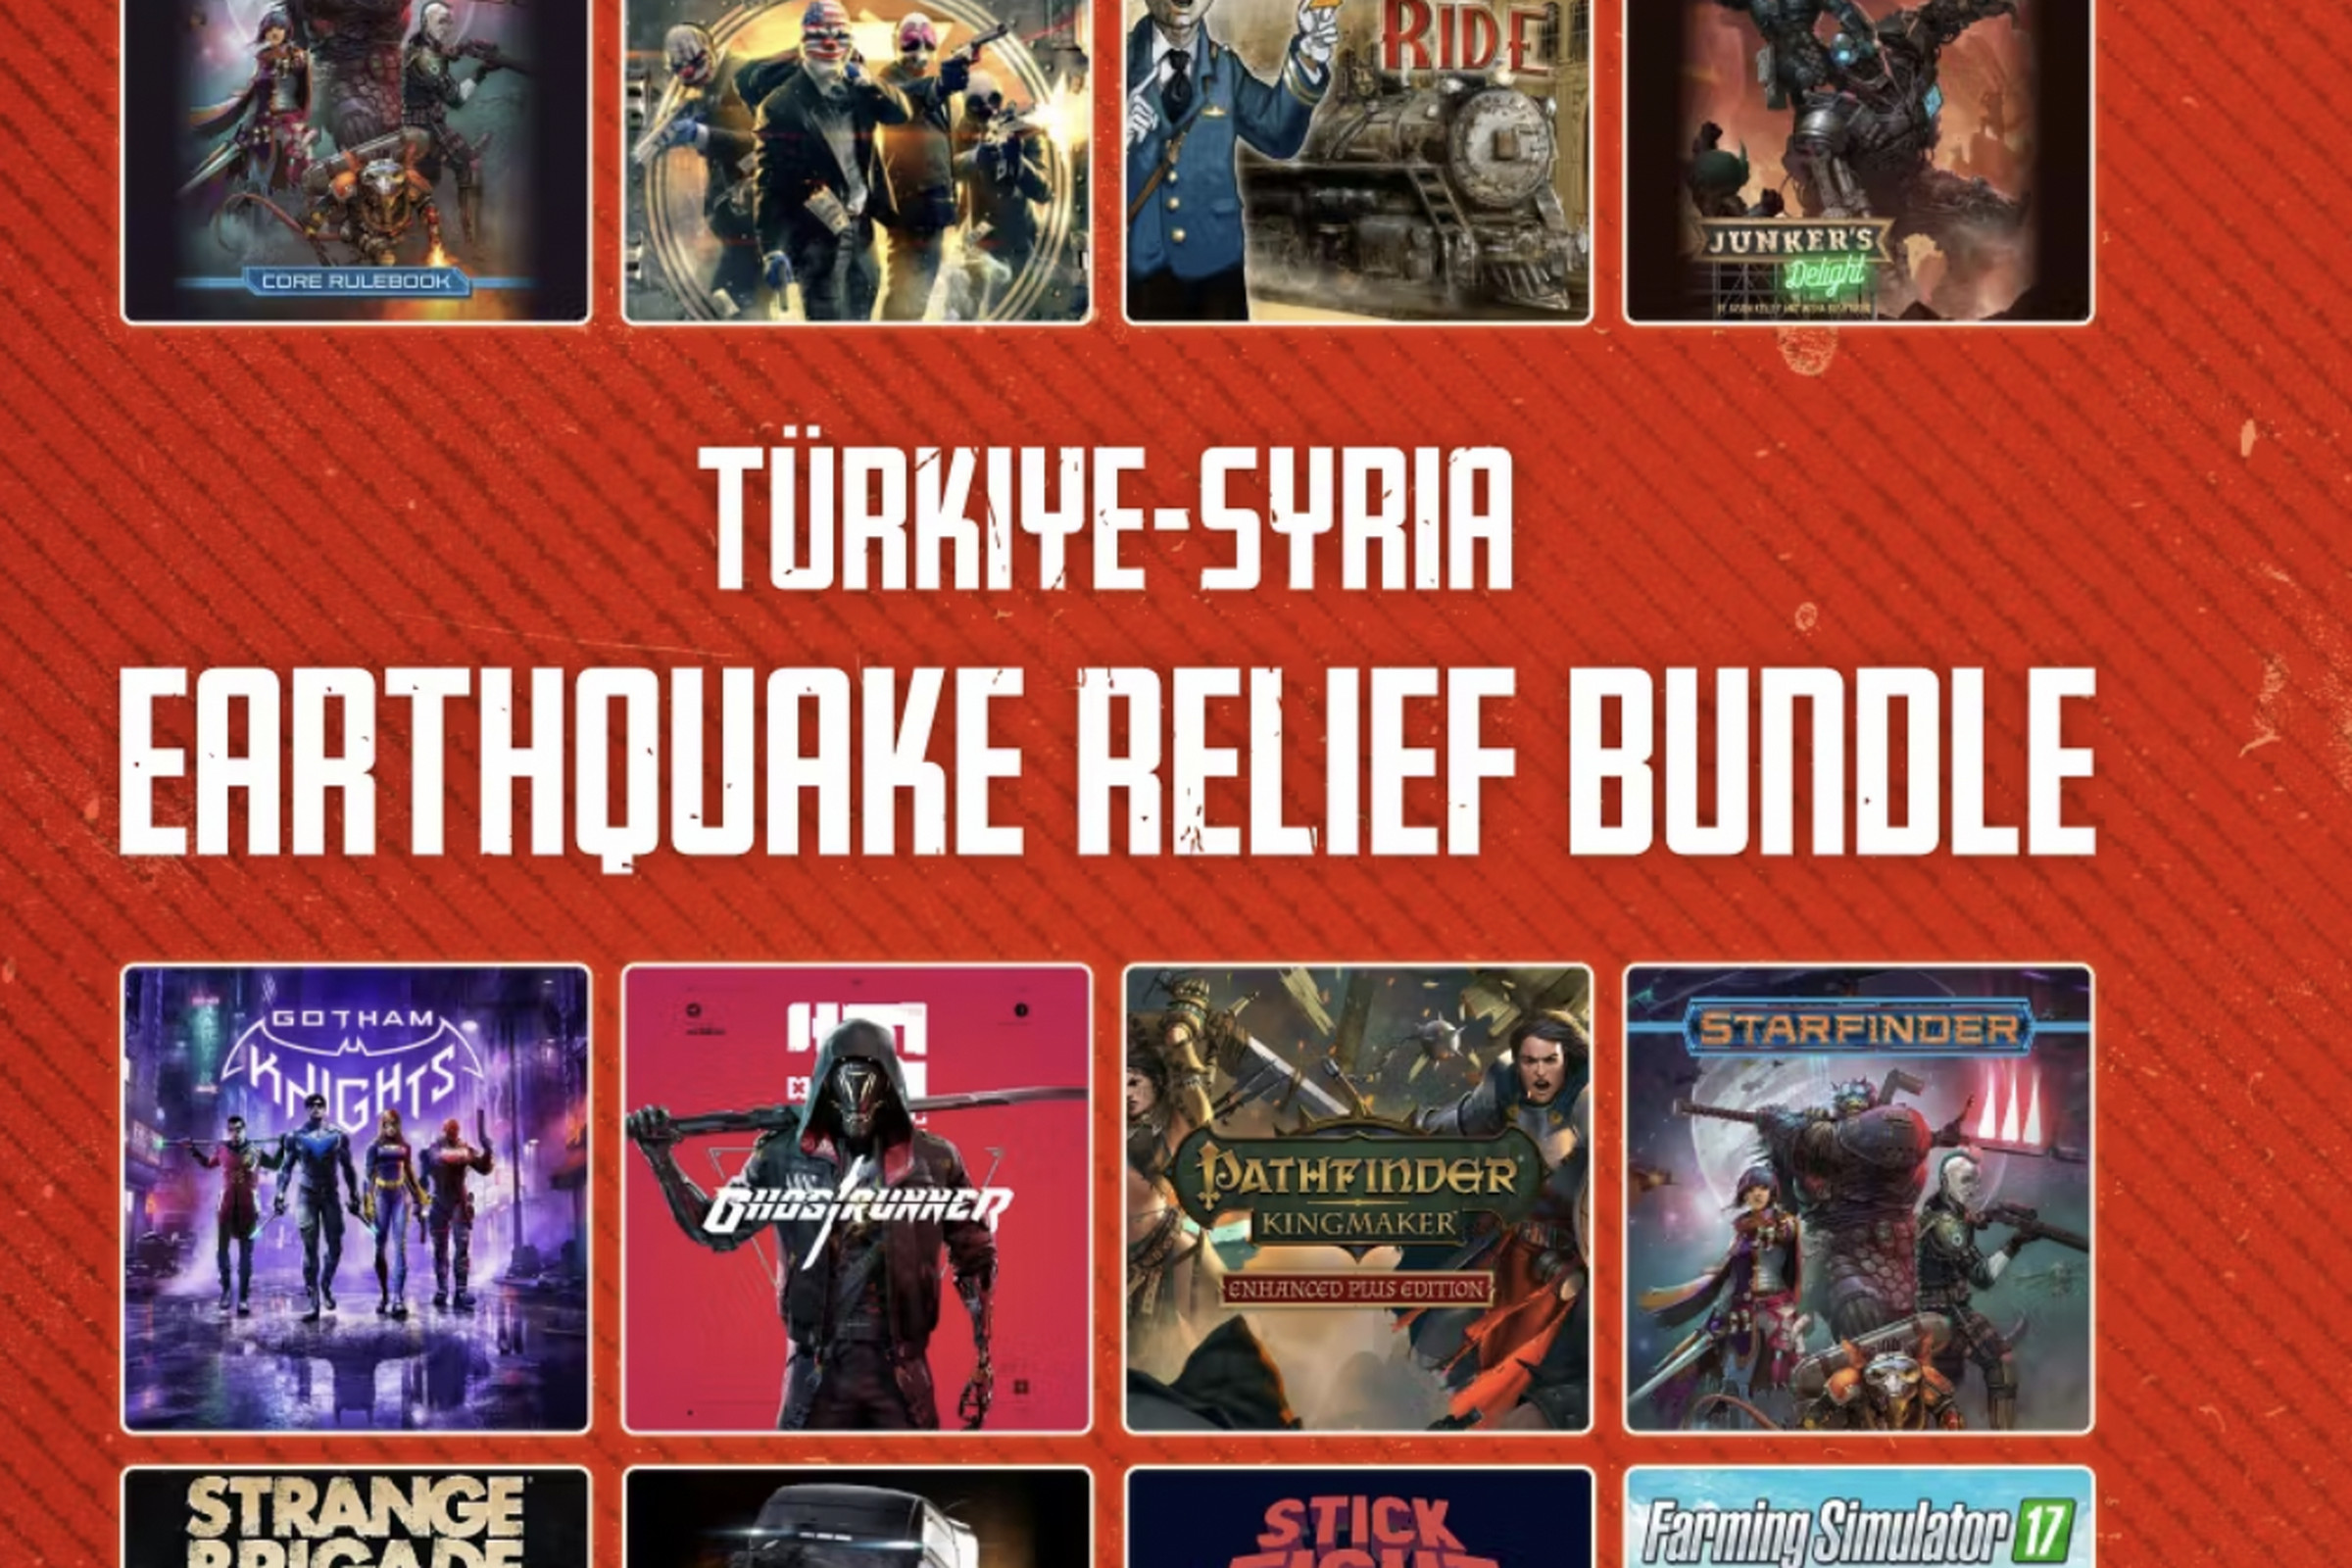 A screenshot showing a graphic advertising Humble Bundle’s earthquake relief bundle